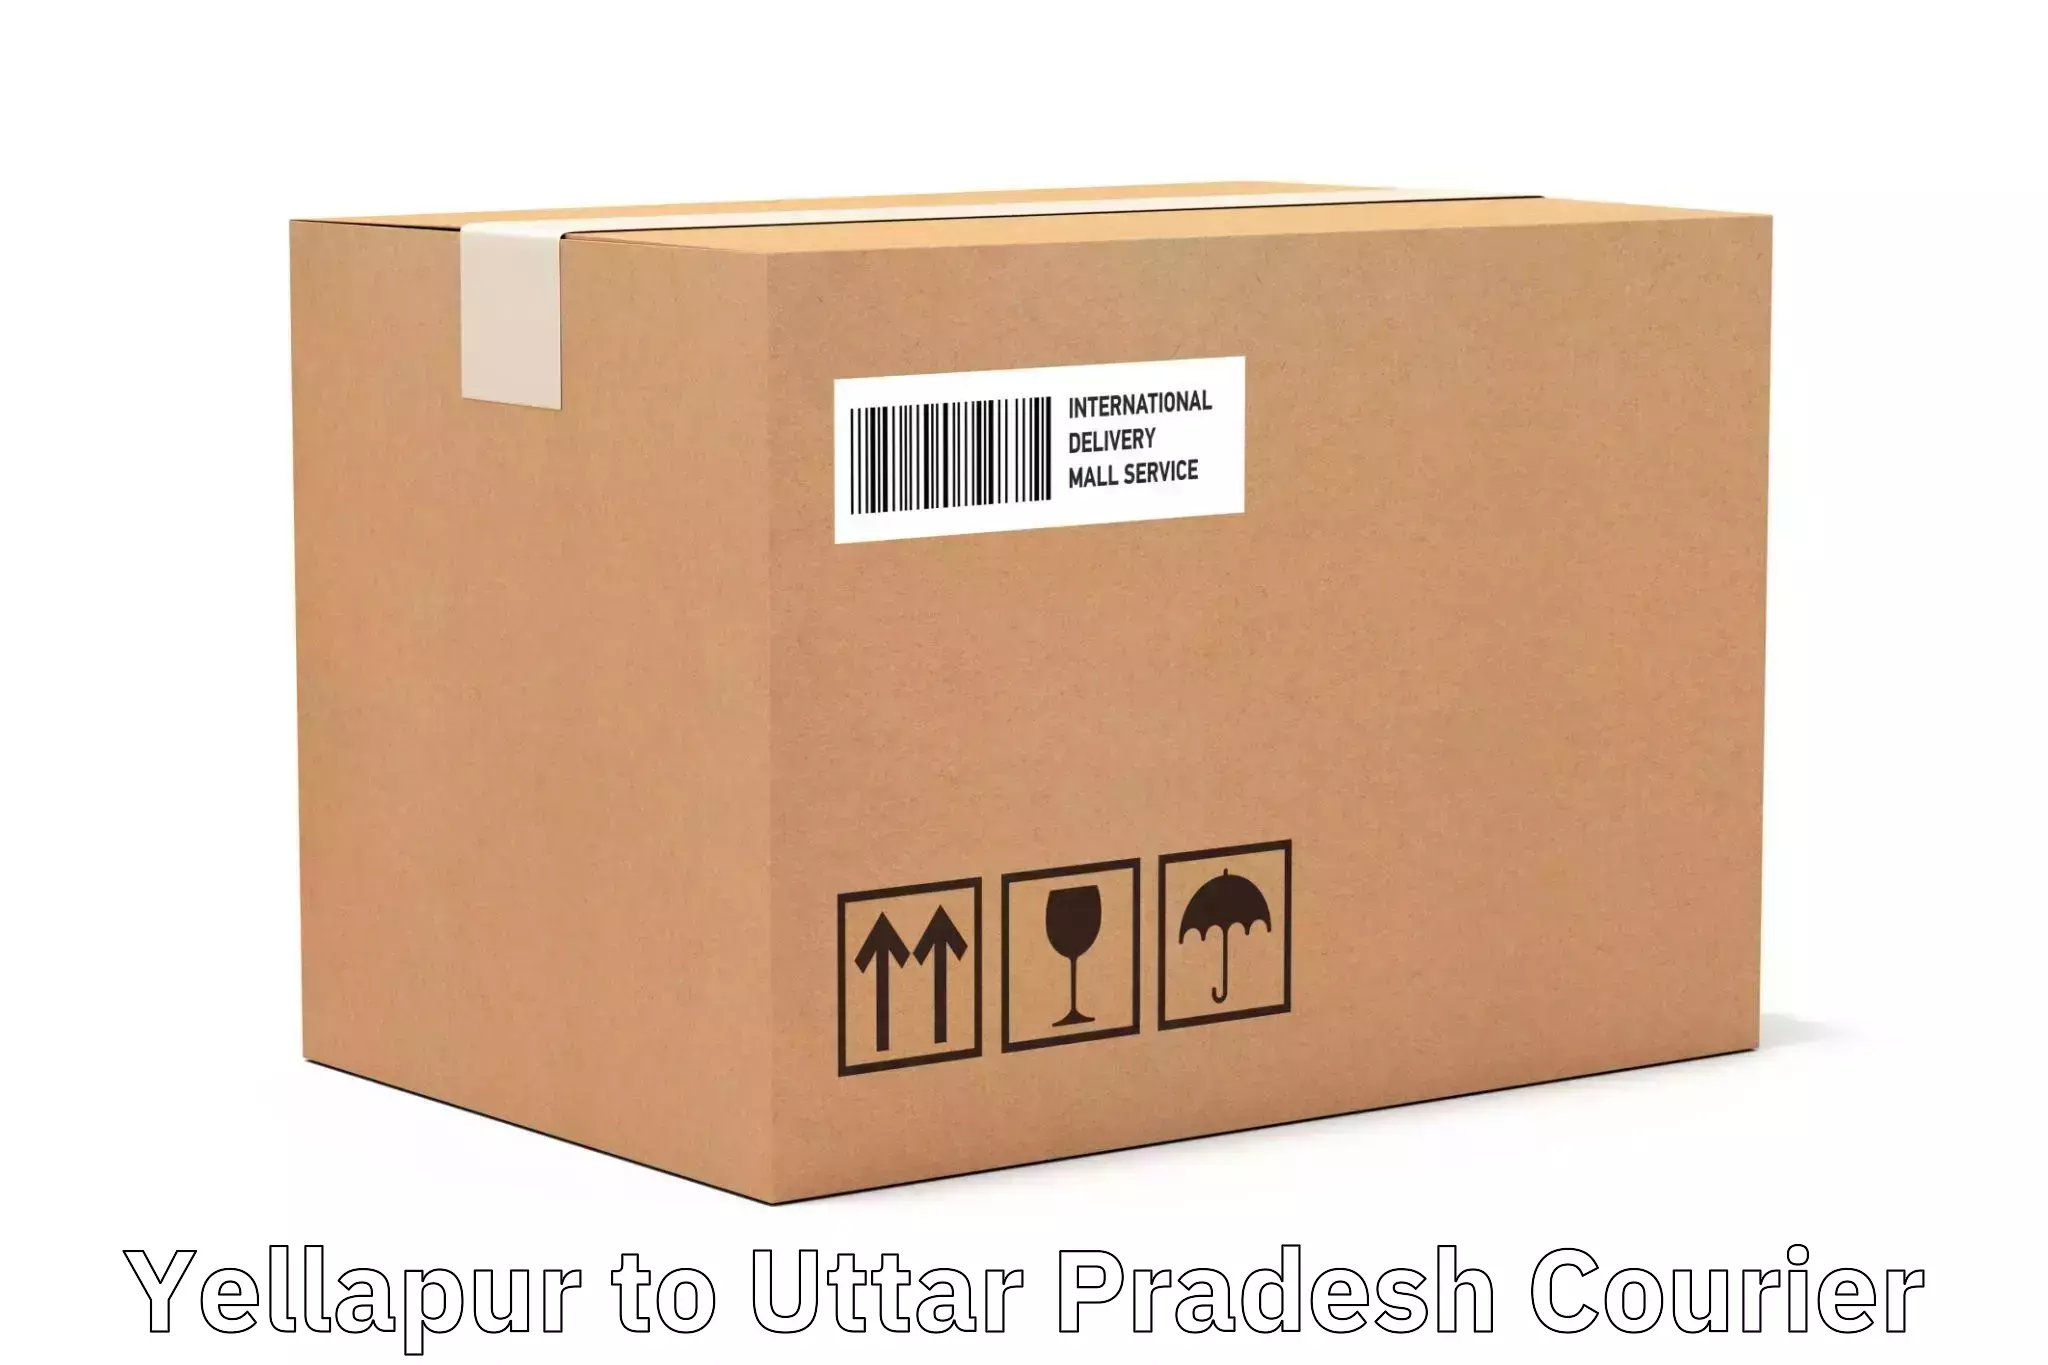 Customer-oriented courier services in Yellapur to Lucknow